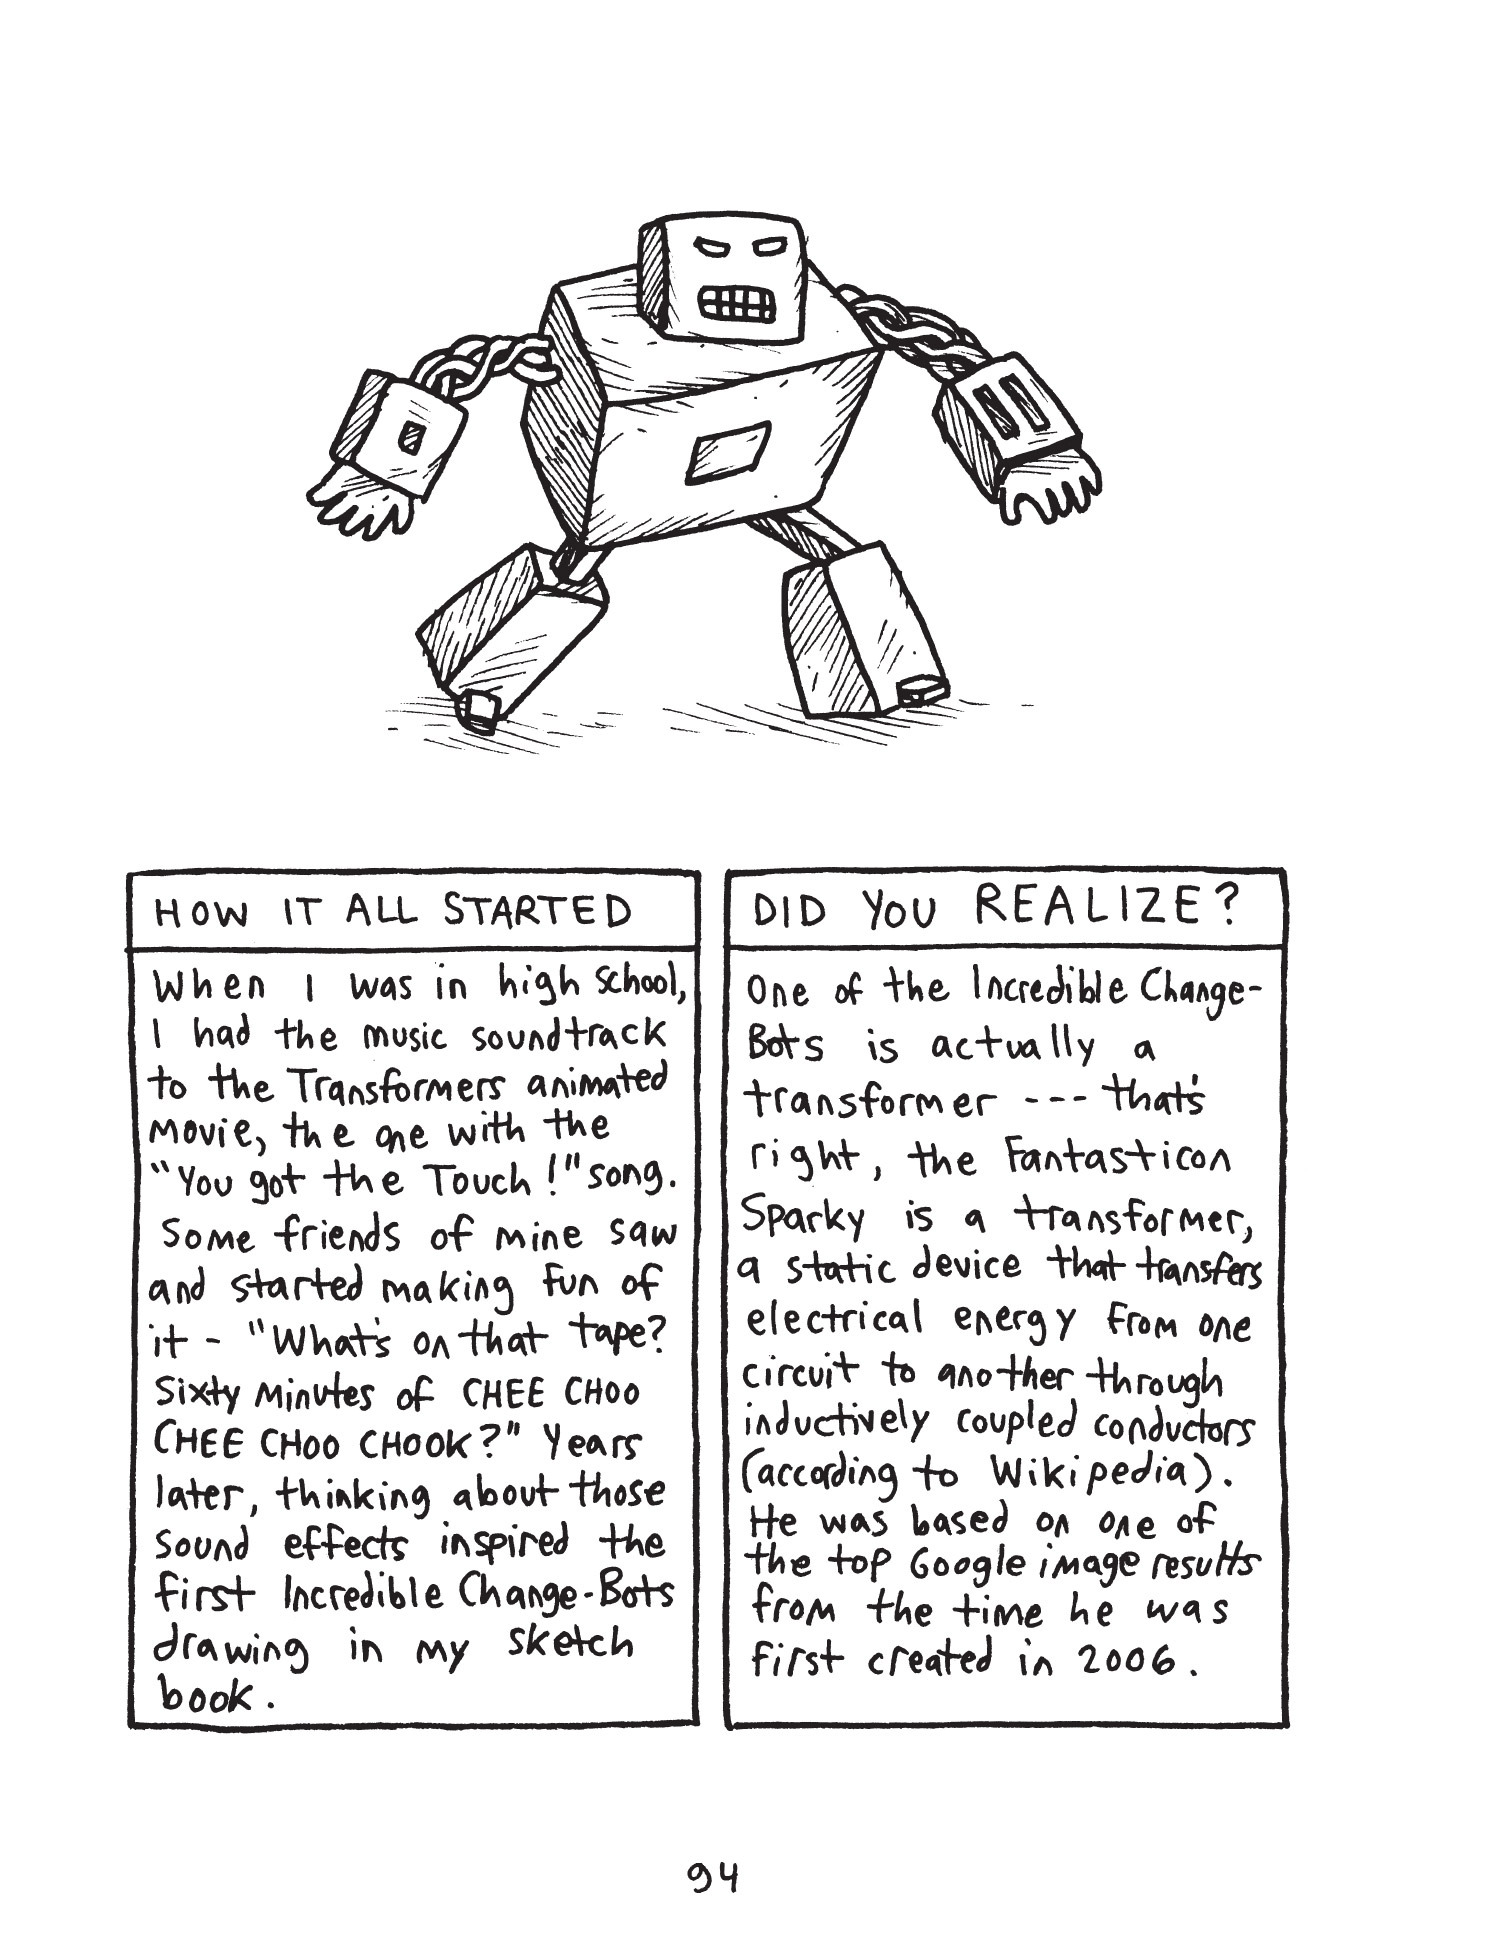 Read online Incredible Change-Bots: Two Point Something Something comic -  Issue # TPB (Part 1) - 93